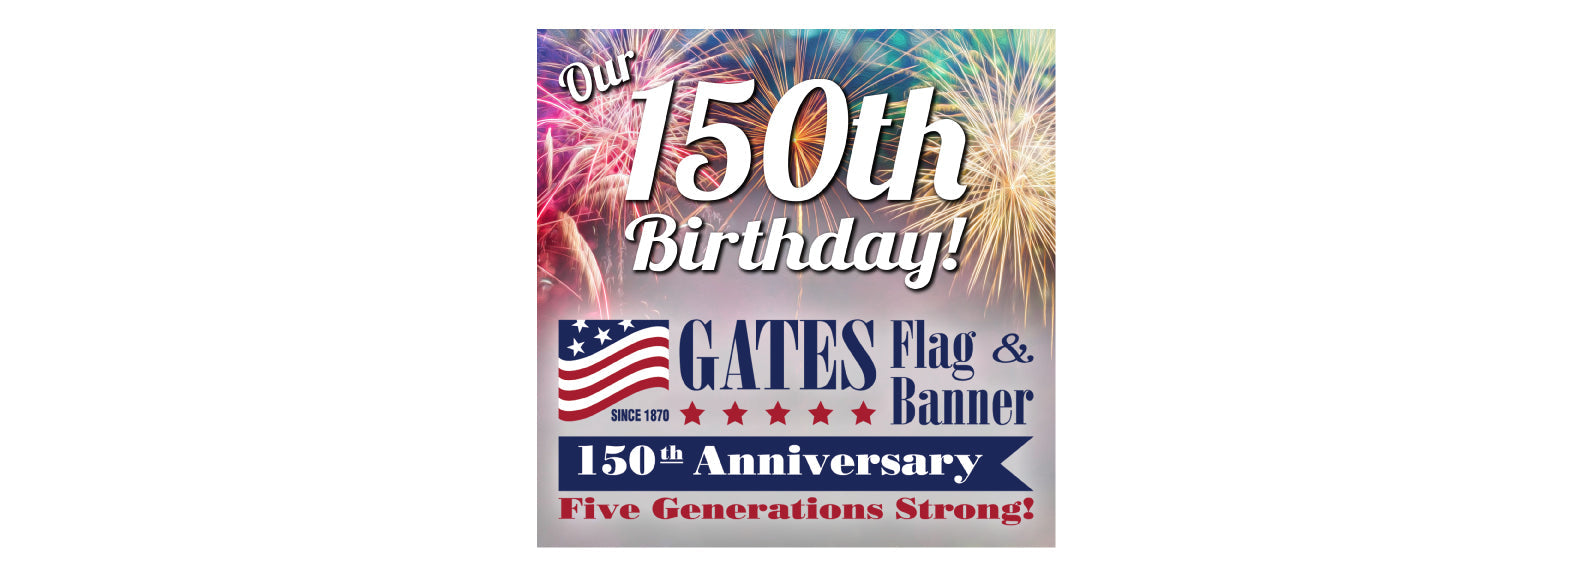 Our 150th Anniversary - A History of Gates Flag & Banner